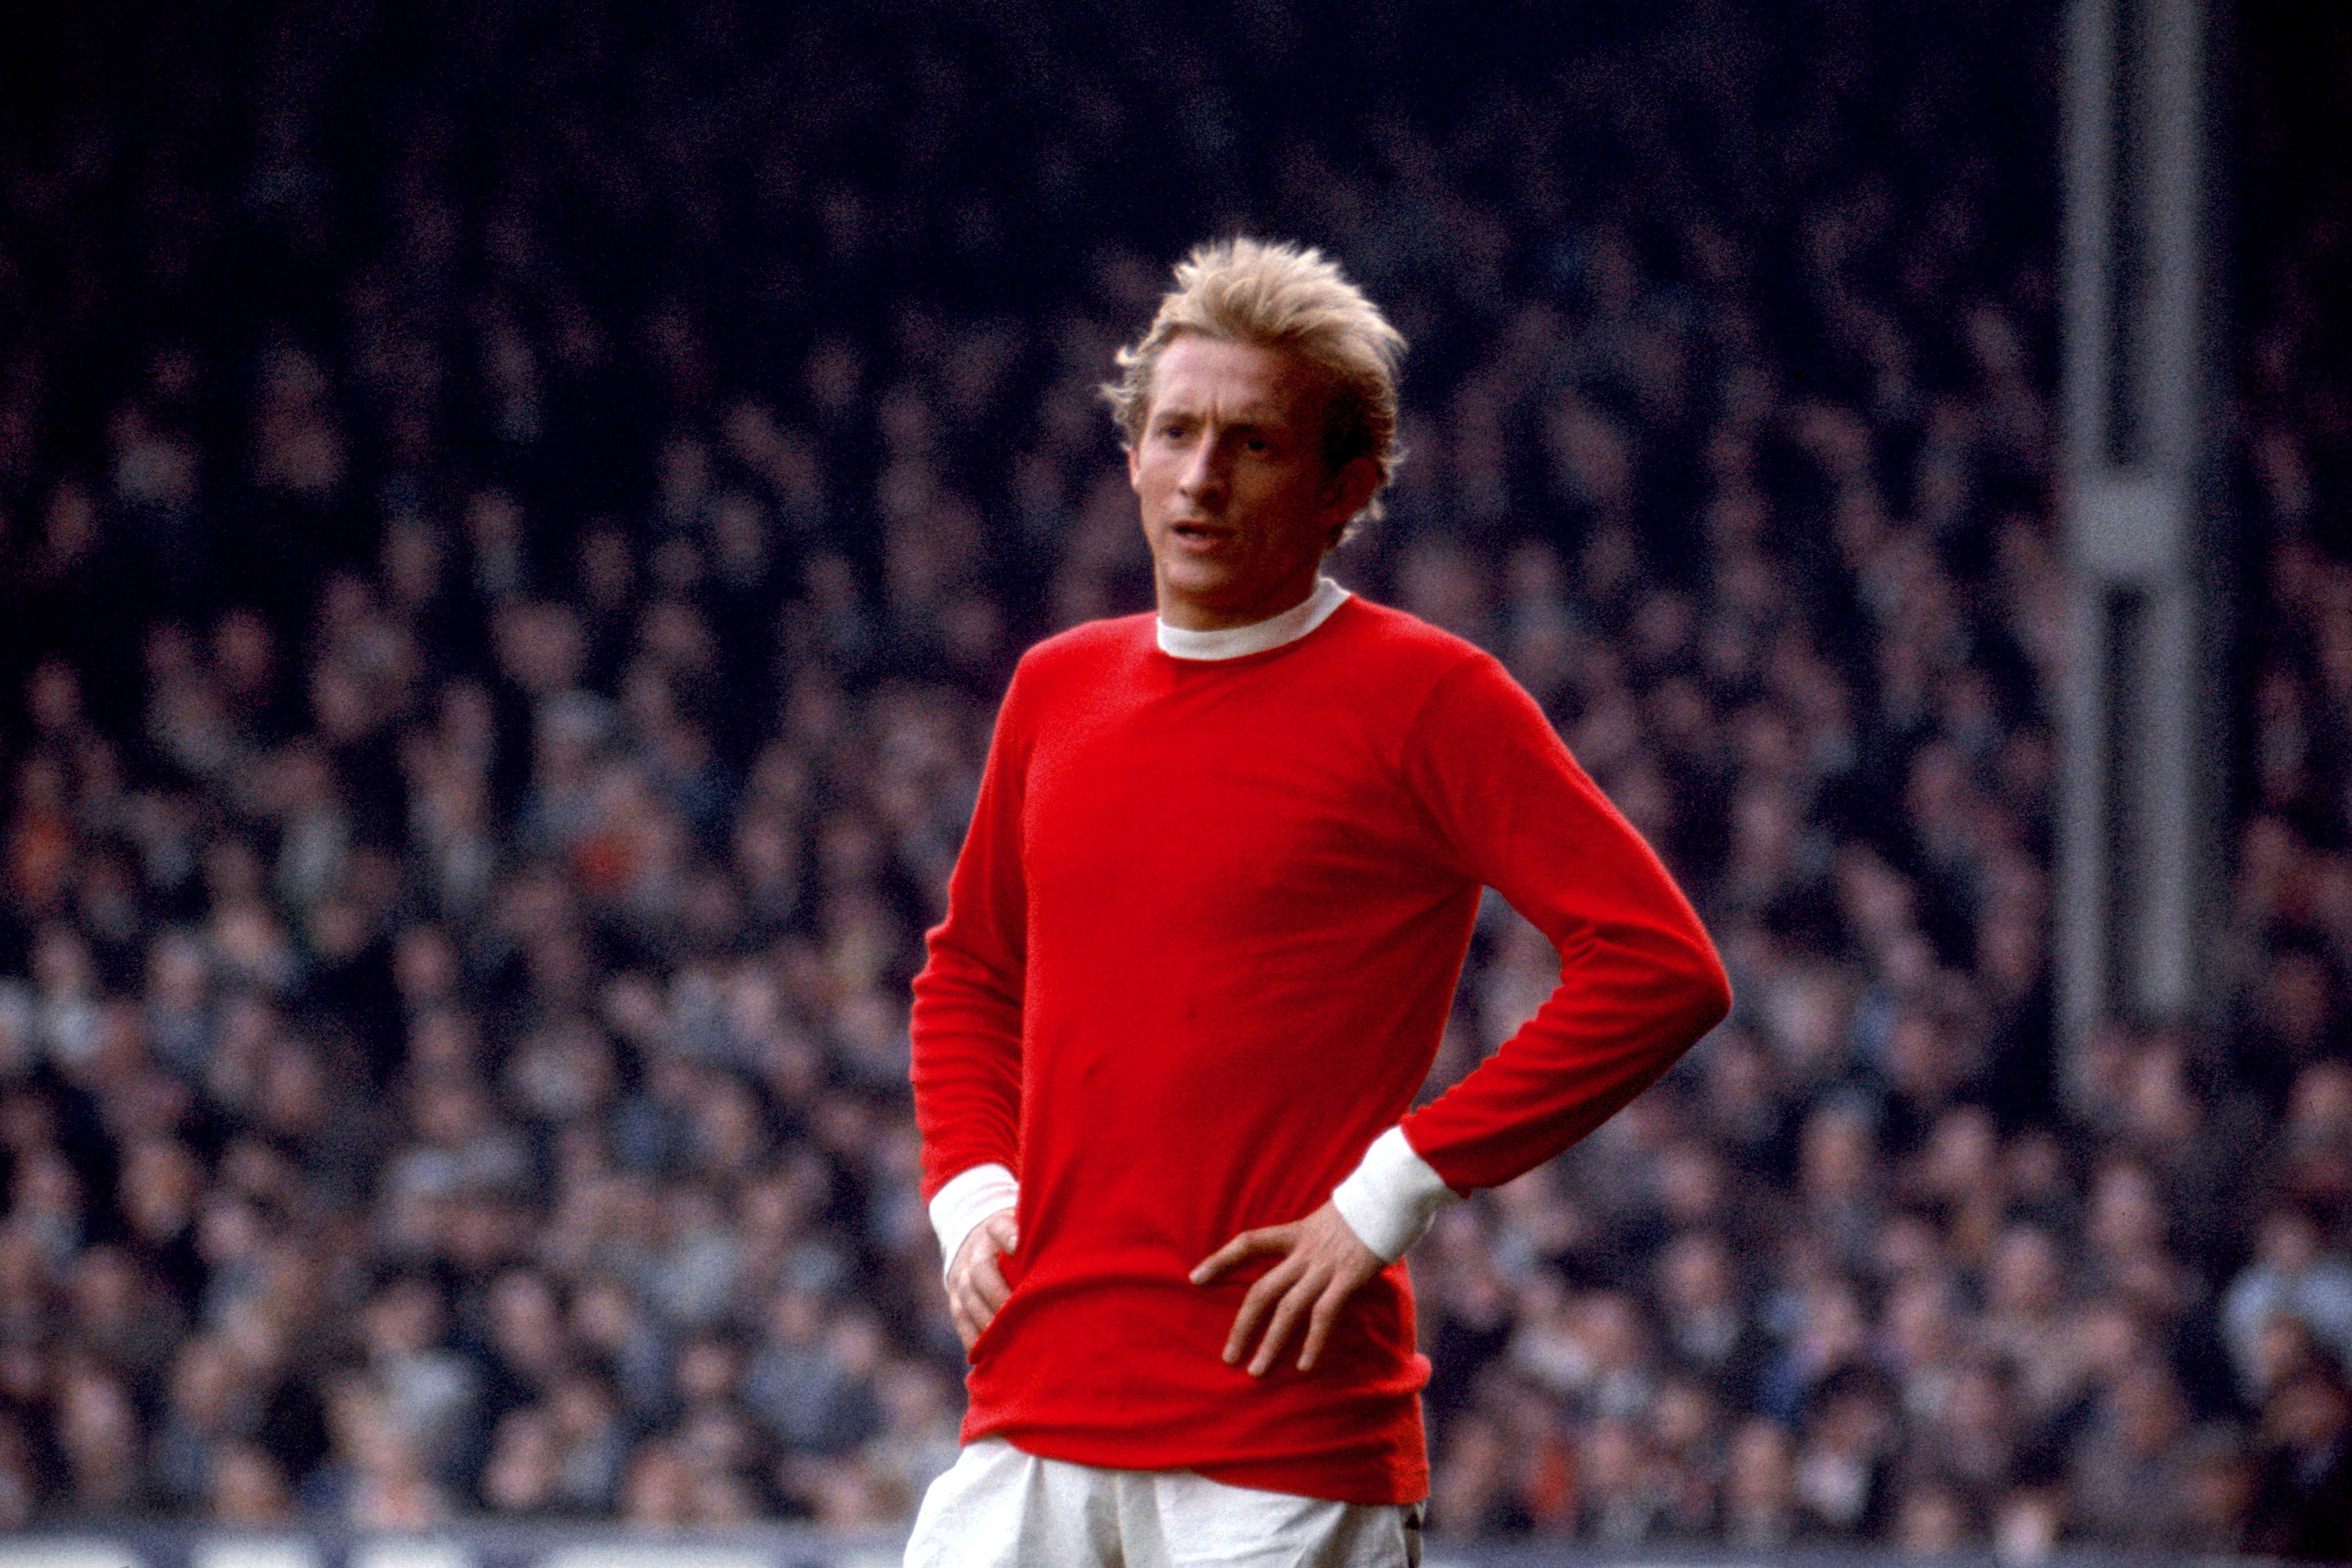 Denis Law enjoyed his most prolific seasons at Manchester United (PA Archive)